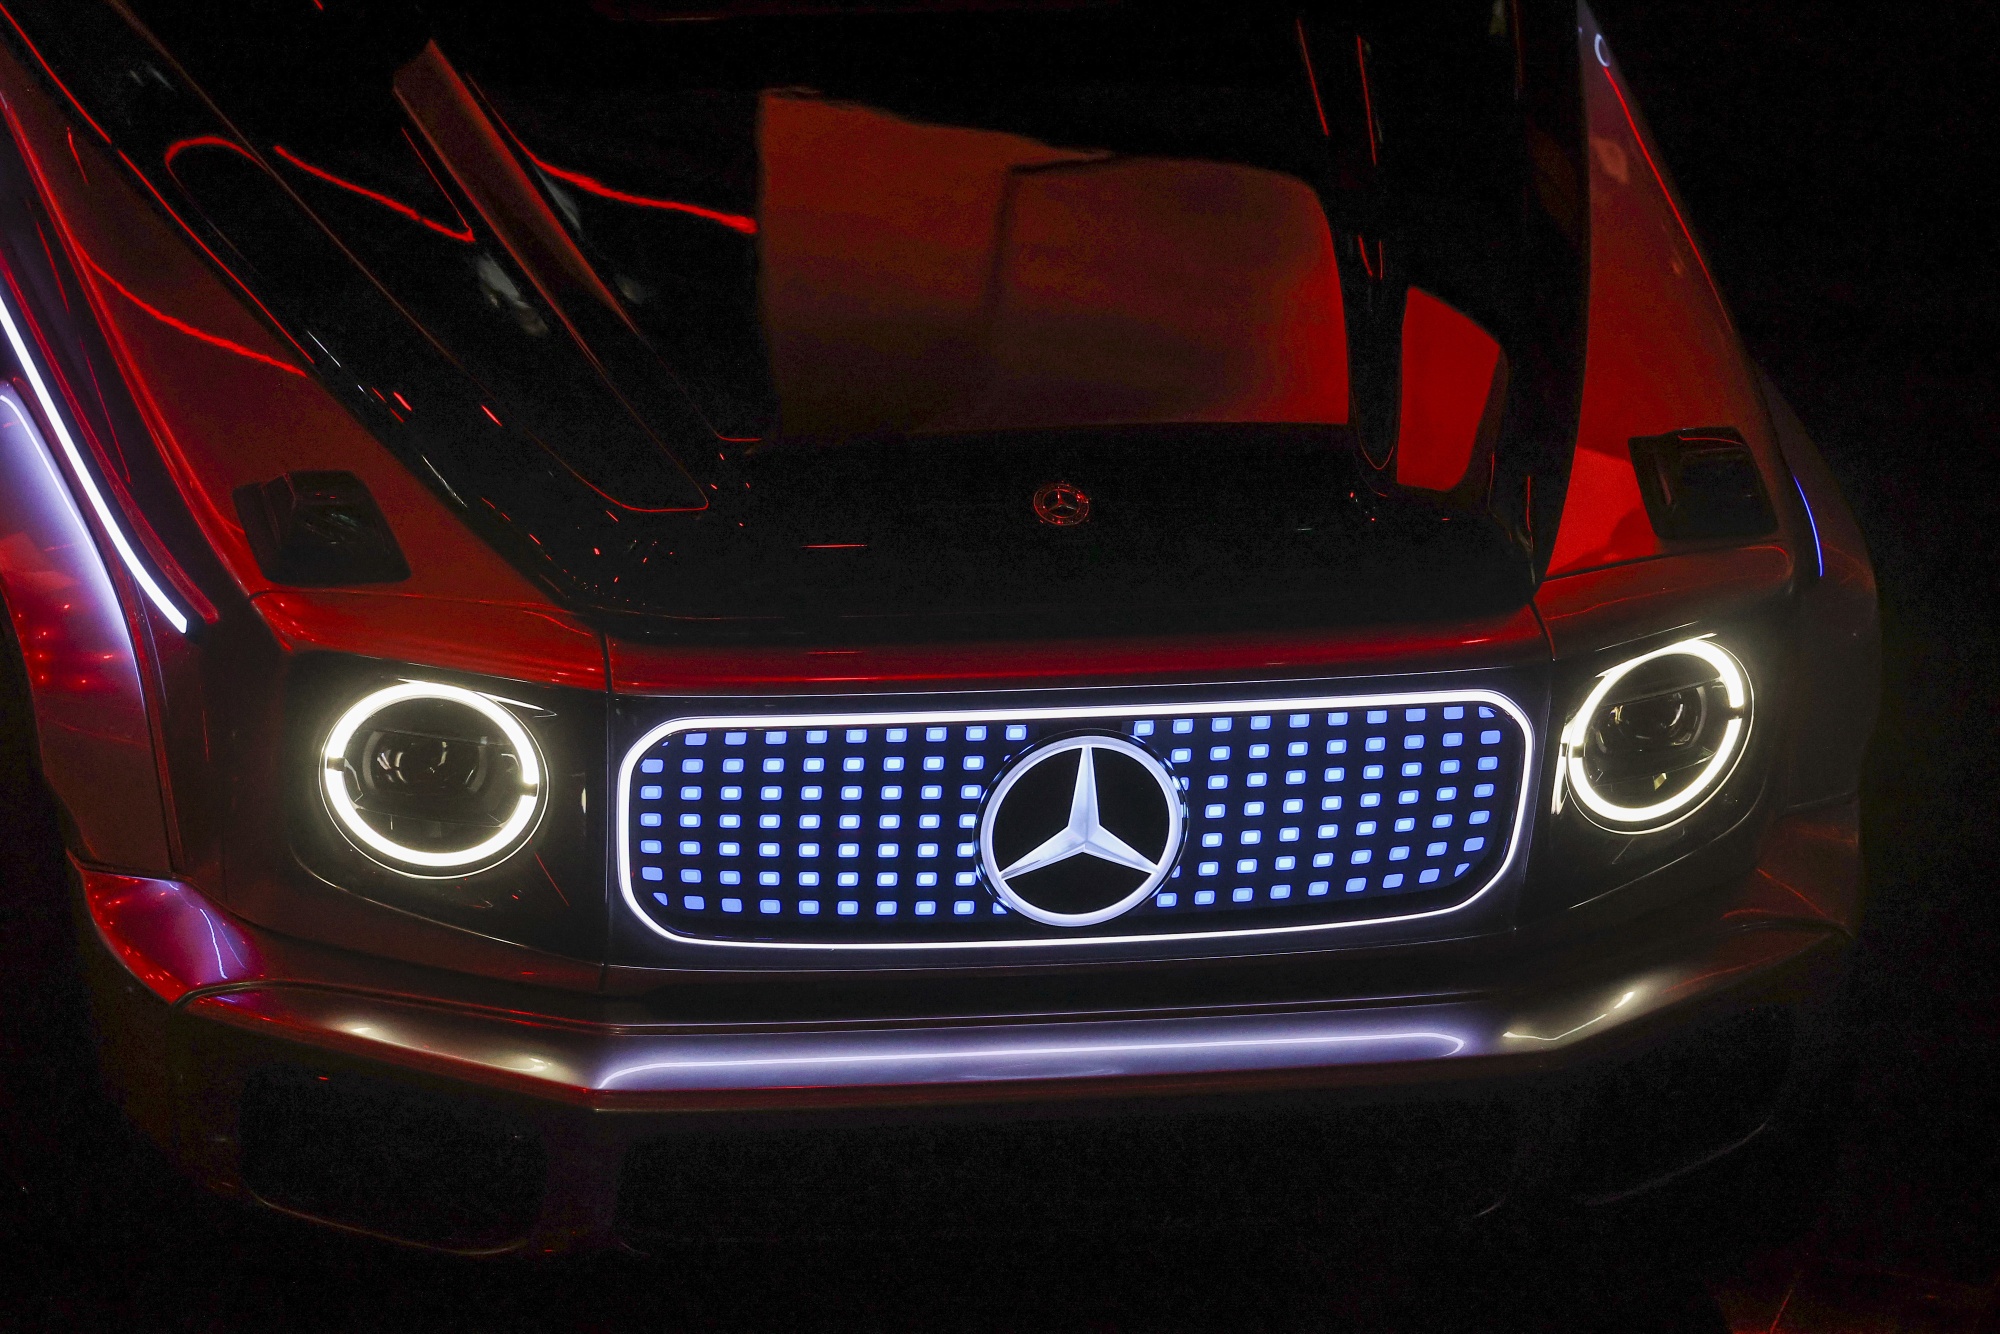 Mercedes G-Wagon Shows 20% Range Jump Coming for EV Batteries - Bloomberg